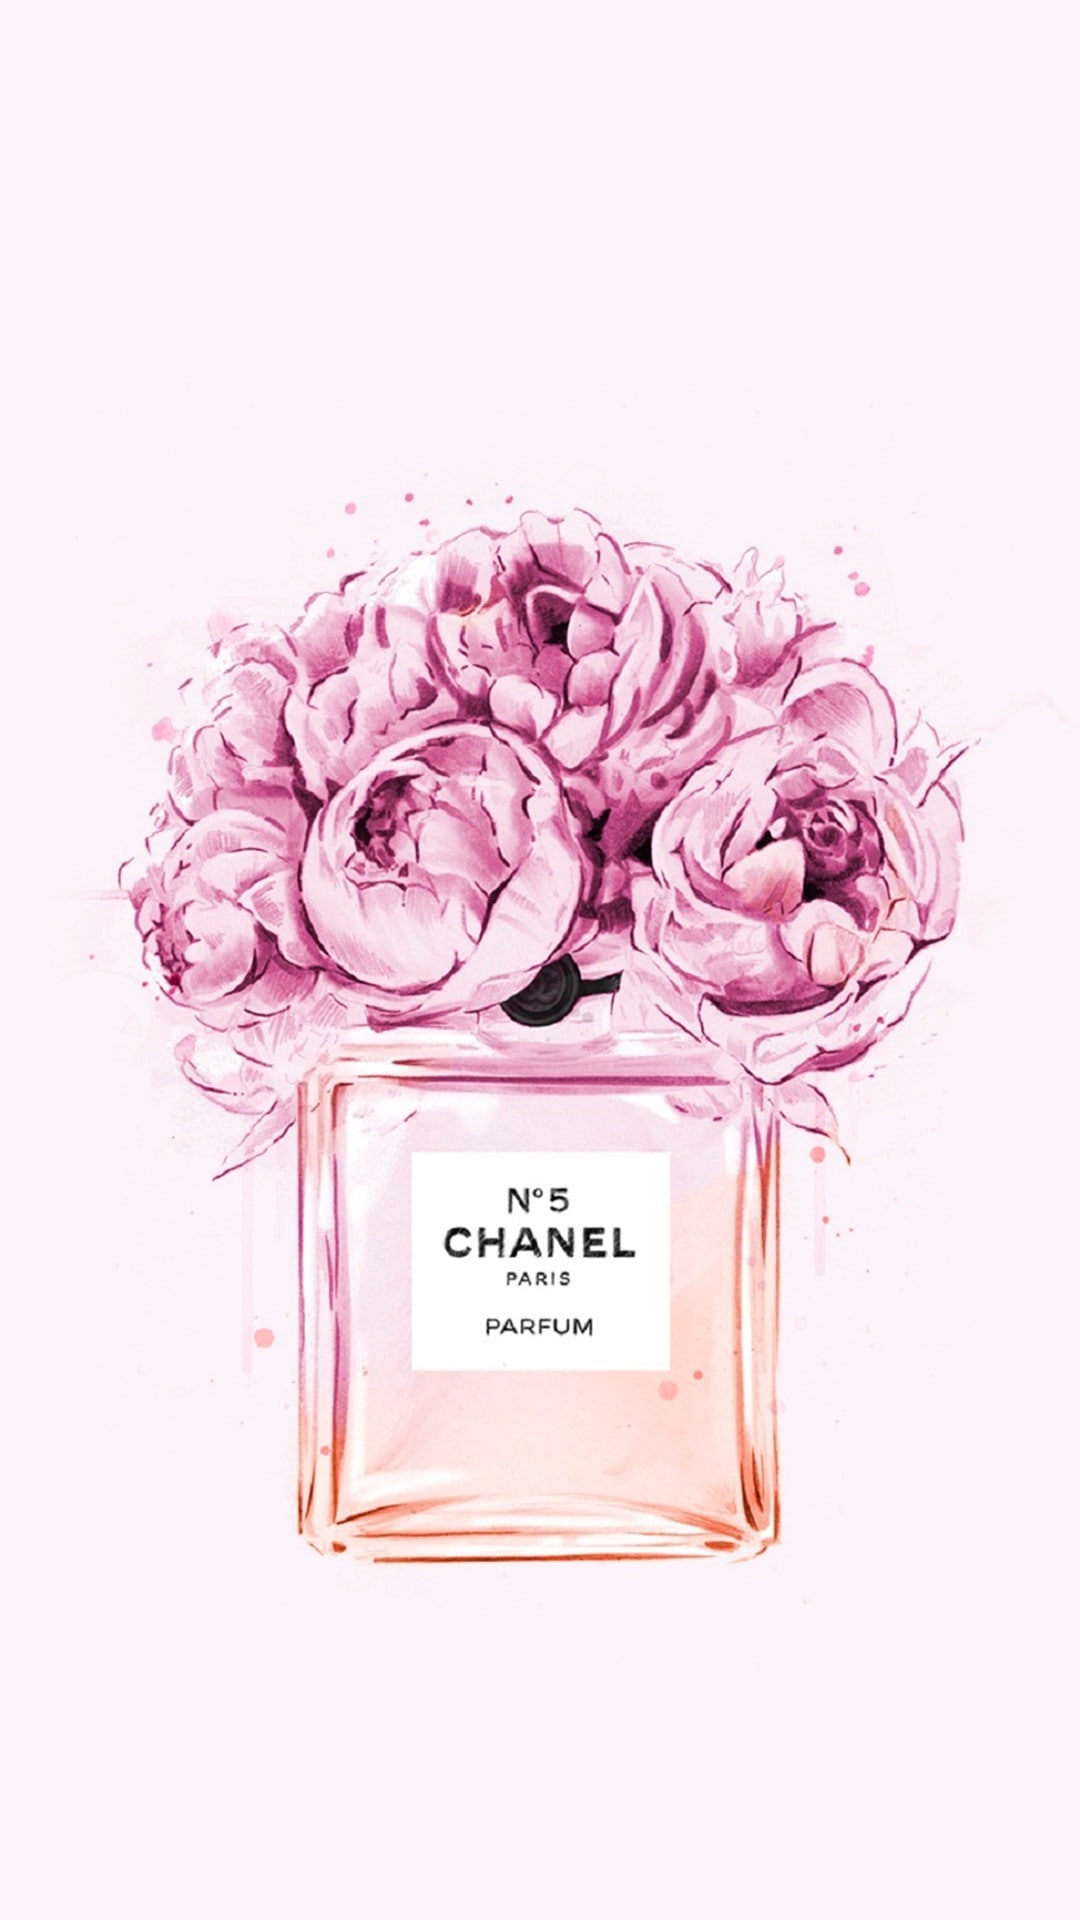 chanel logo wallpaper for iphone 5